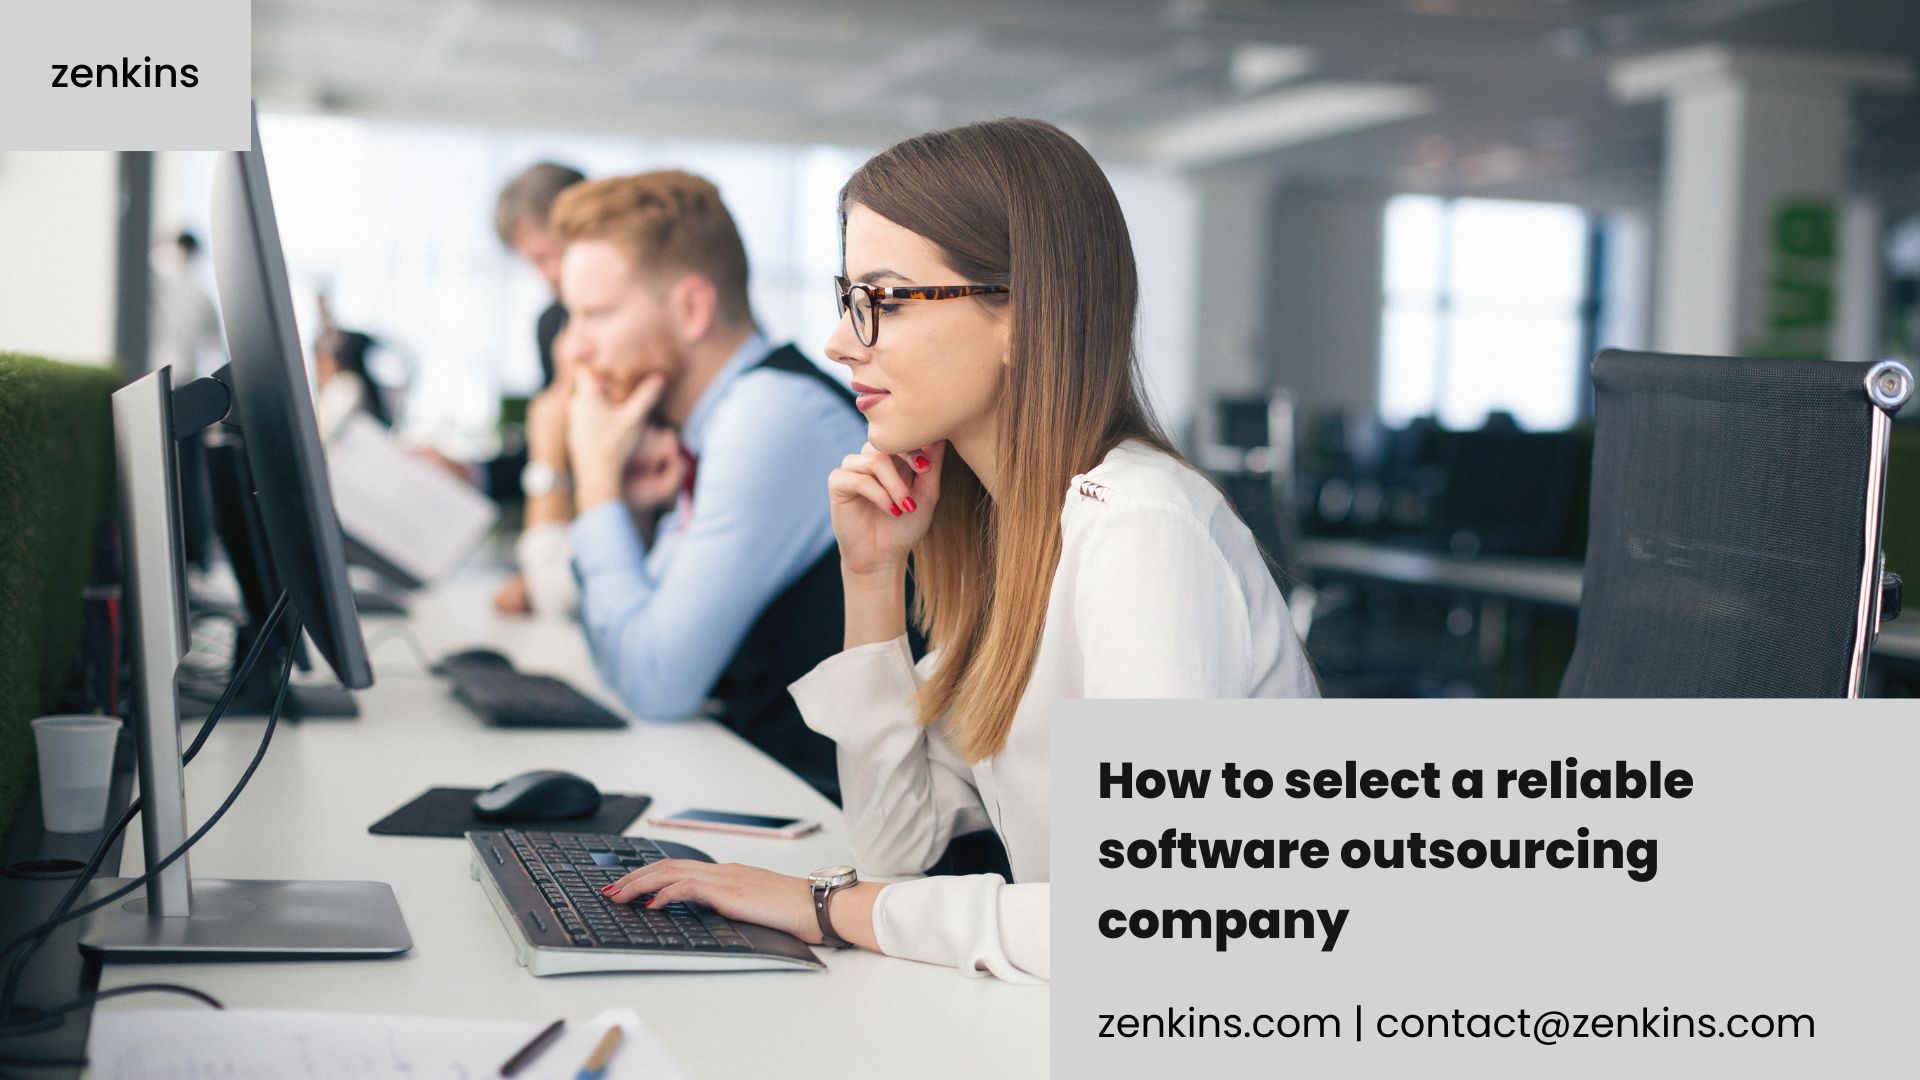 Reliable software outsourcing company